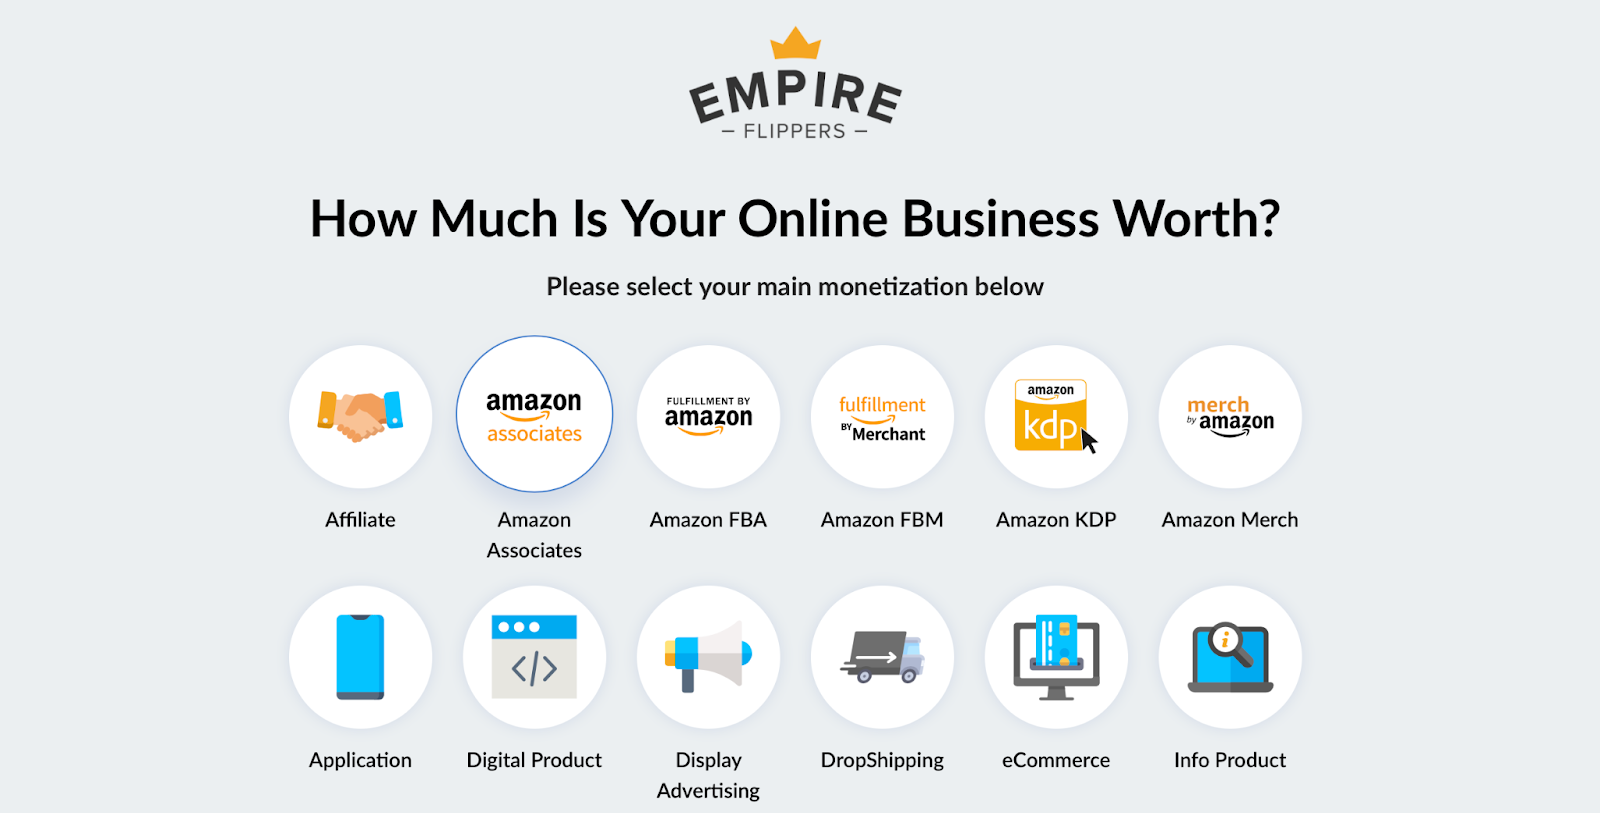 empire flippers valuation tool homepage asking you how much is your online business worth